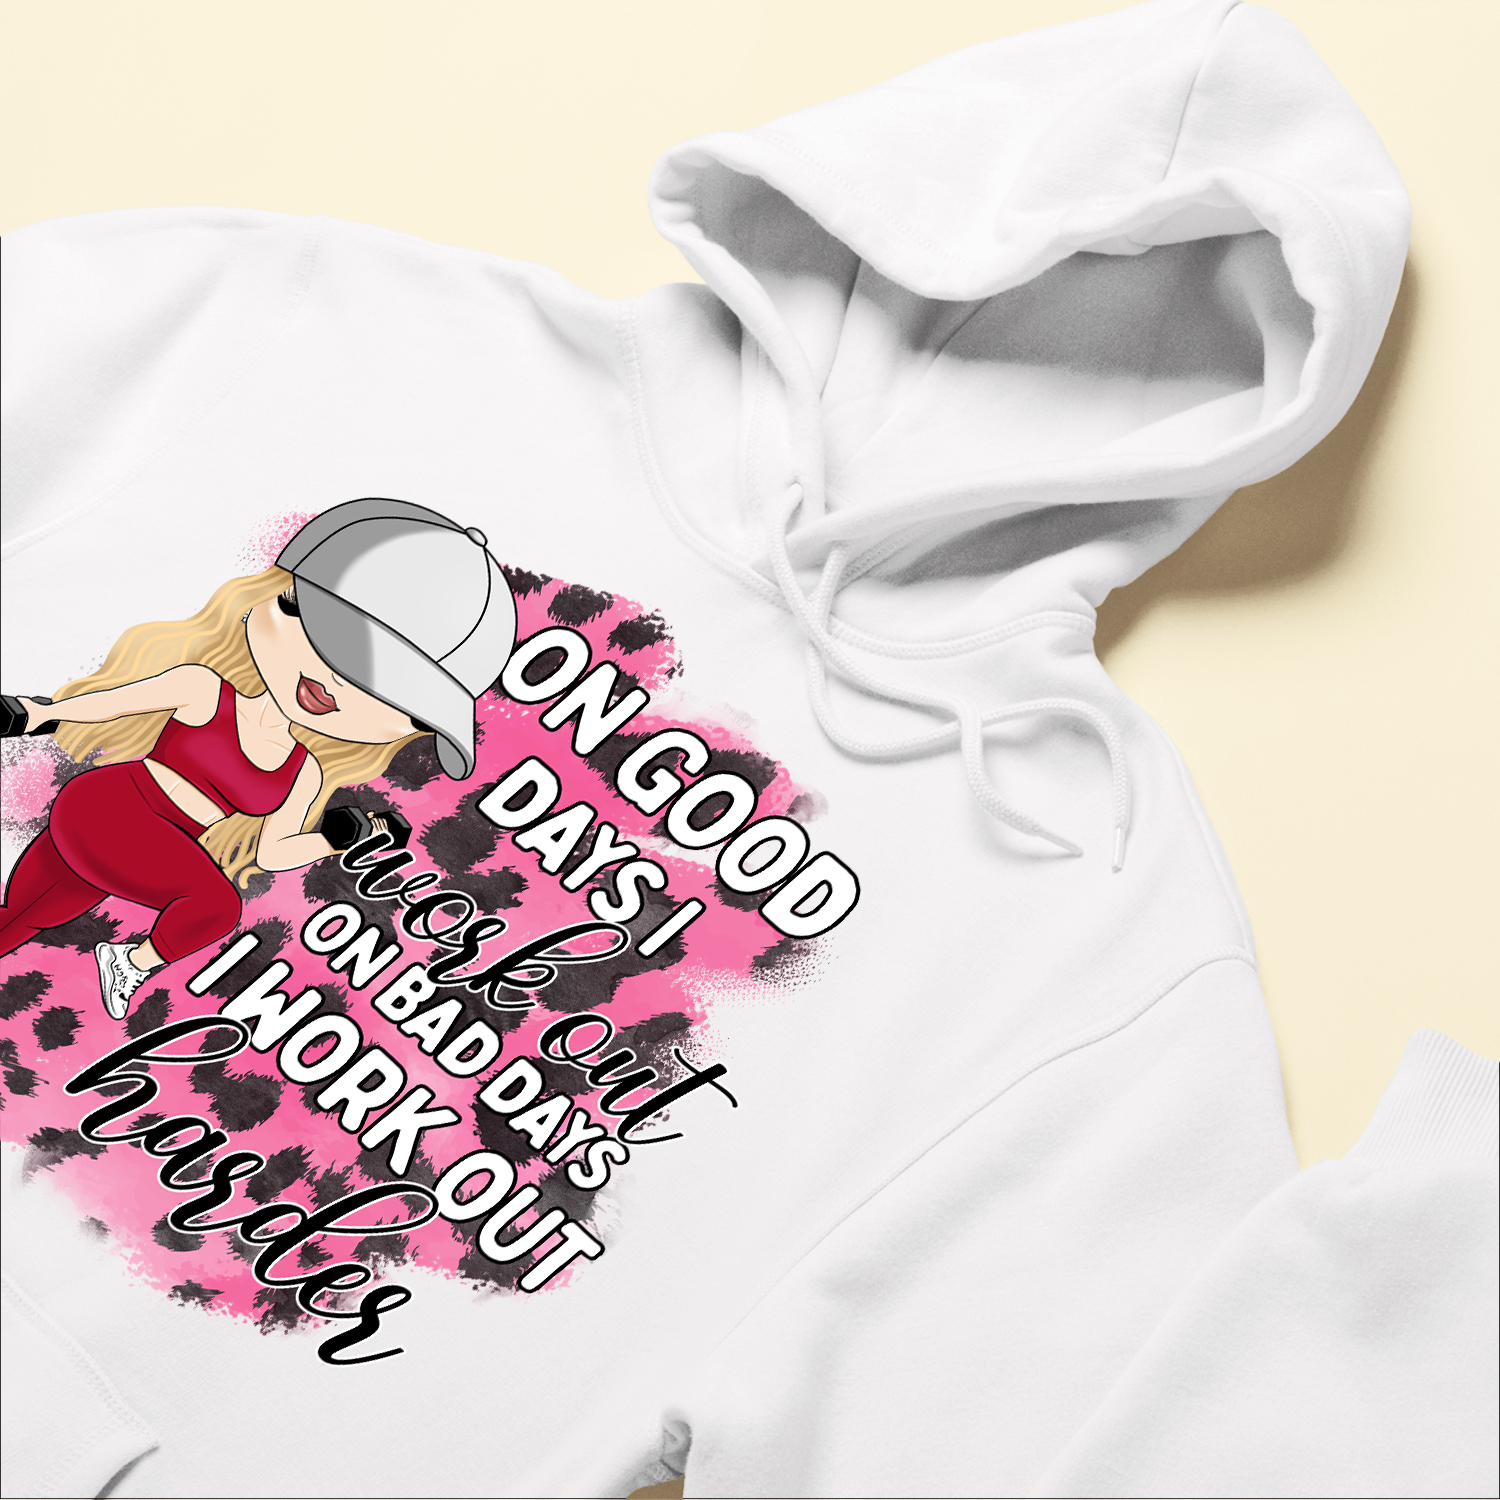 on Bad Days I Work Out Harder - Personalized Shirt - Birthday Gift for Her, Gym Girl, Fitness Lover Pullover Hoodie / White / 2XL